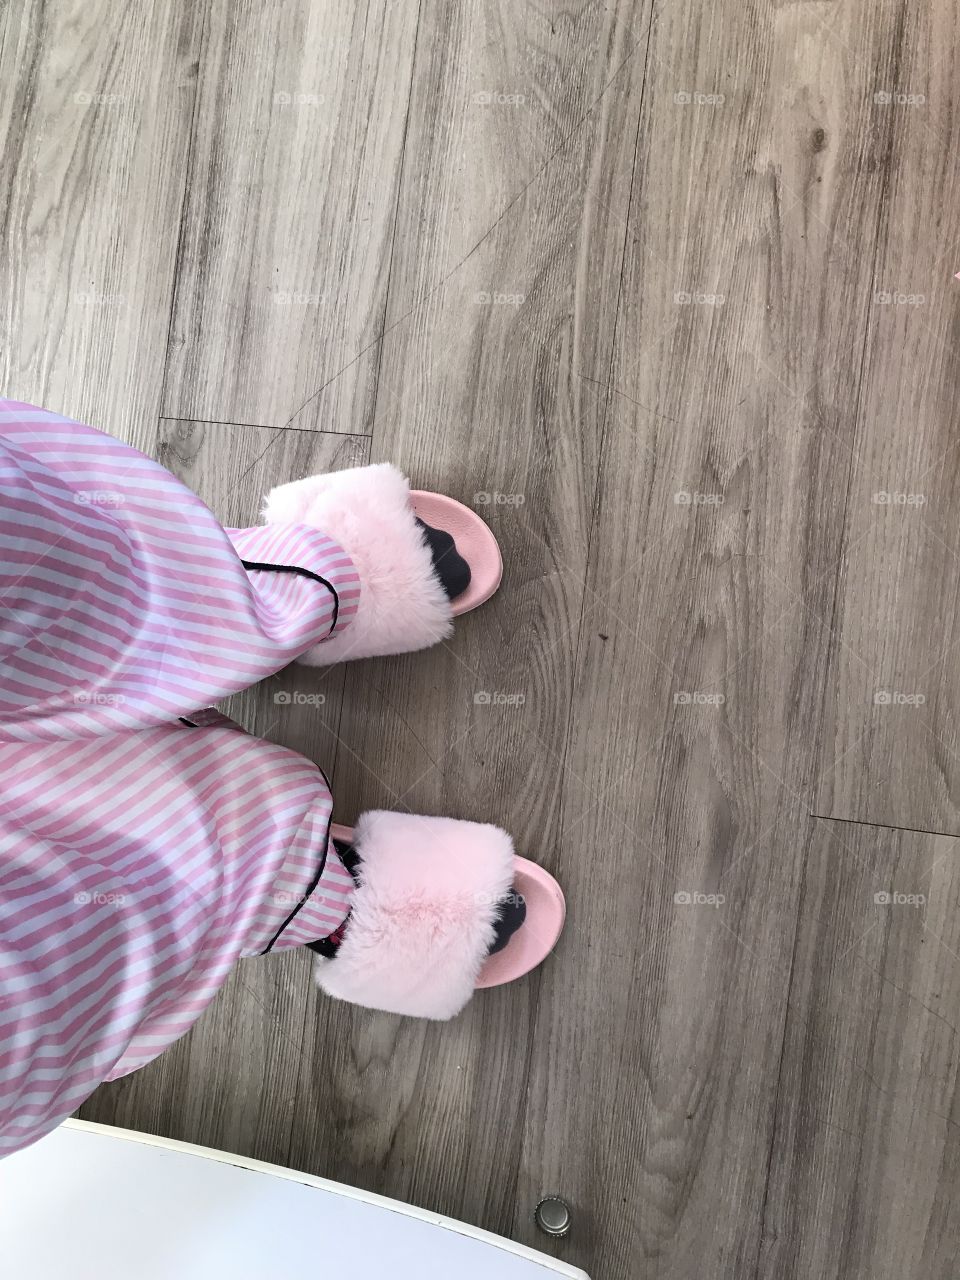 Slippers and PJs